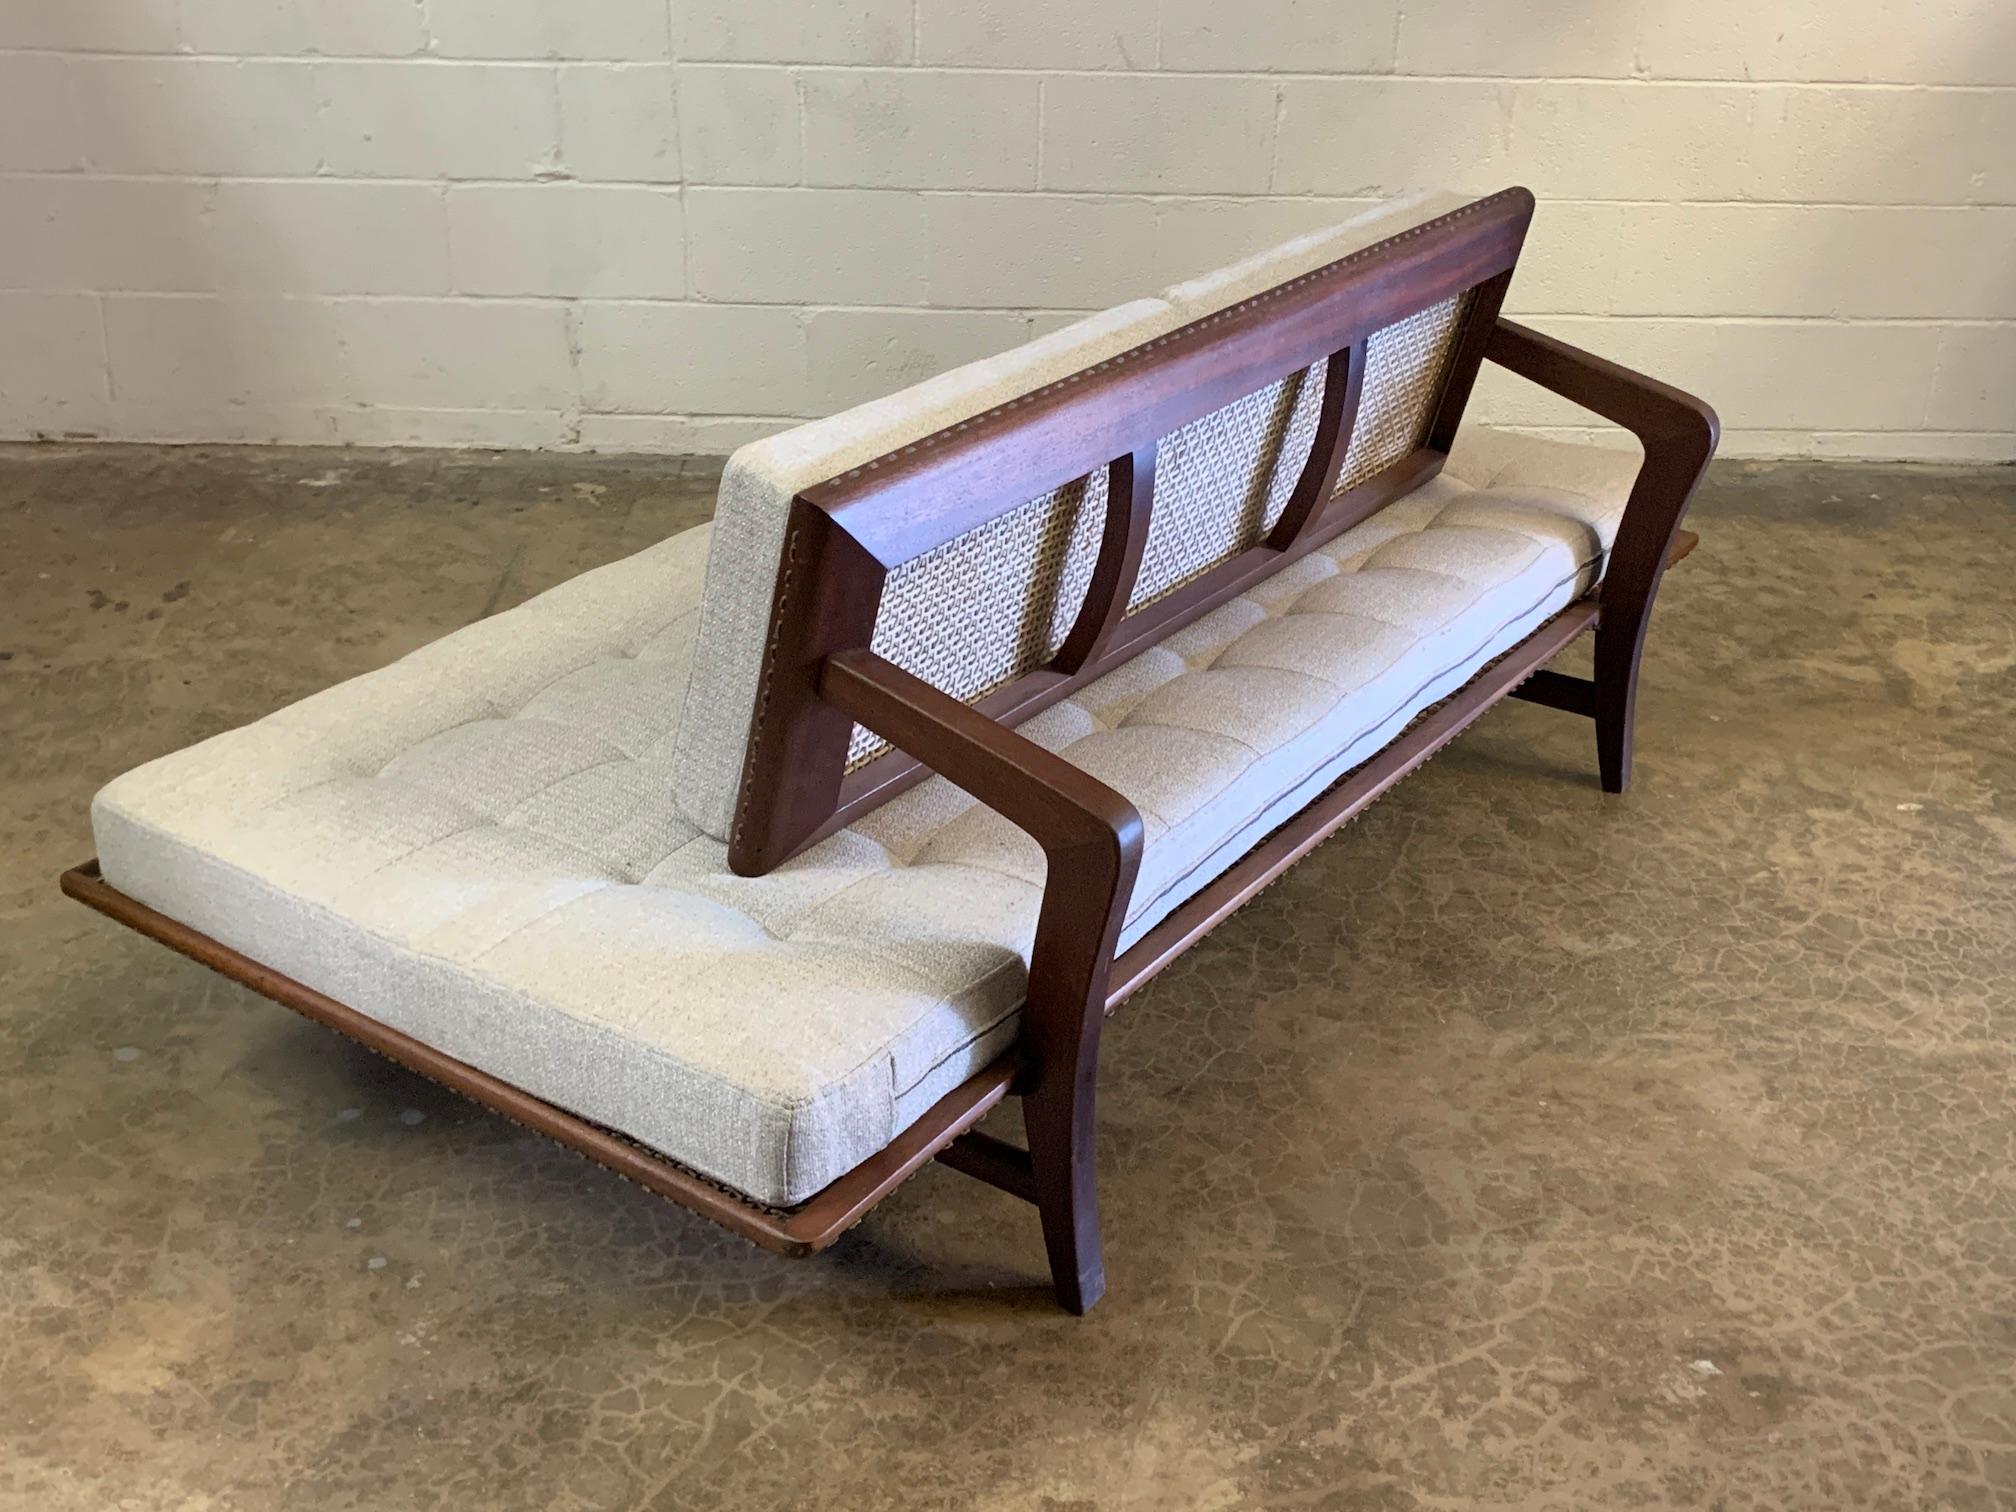 A rare mahogany daybed with woven rope seat and back. Designed by Charles Allen for Regil de Yucatan.